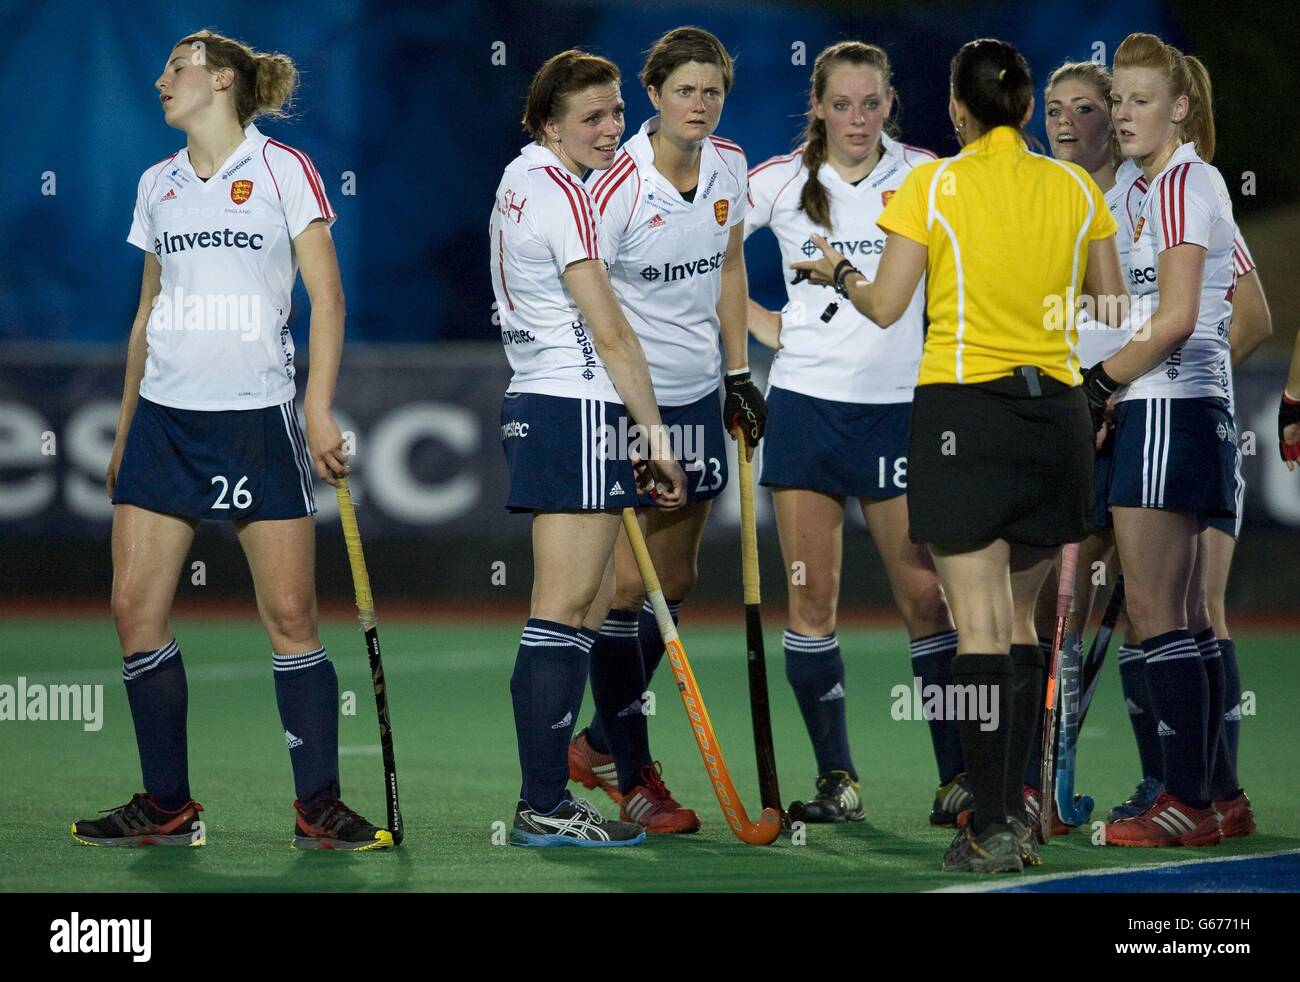 Hockey - Investec World League Semi Finals - England v Spain - Chiswick. England's players react to the umpire's decision to over-turn a penalty corner during the Investec World League Semi Finals, Chiswick. Stock Photo